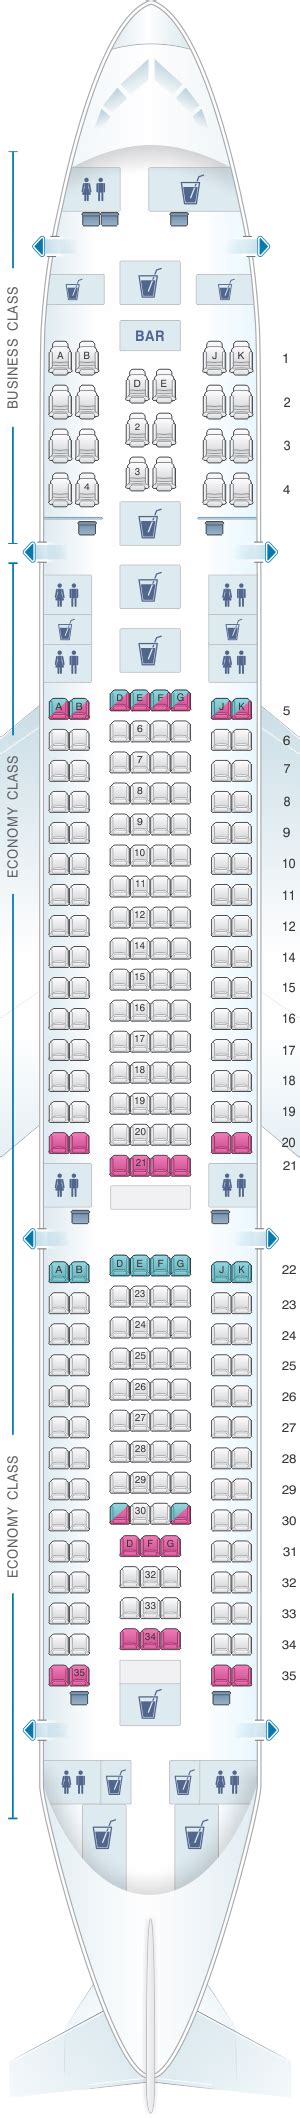 Turkish Airlines A Business Class Seat Map Elcho Table